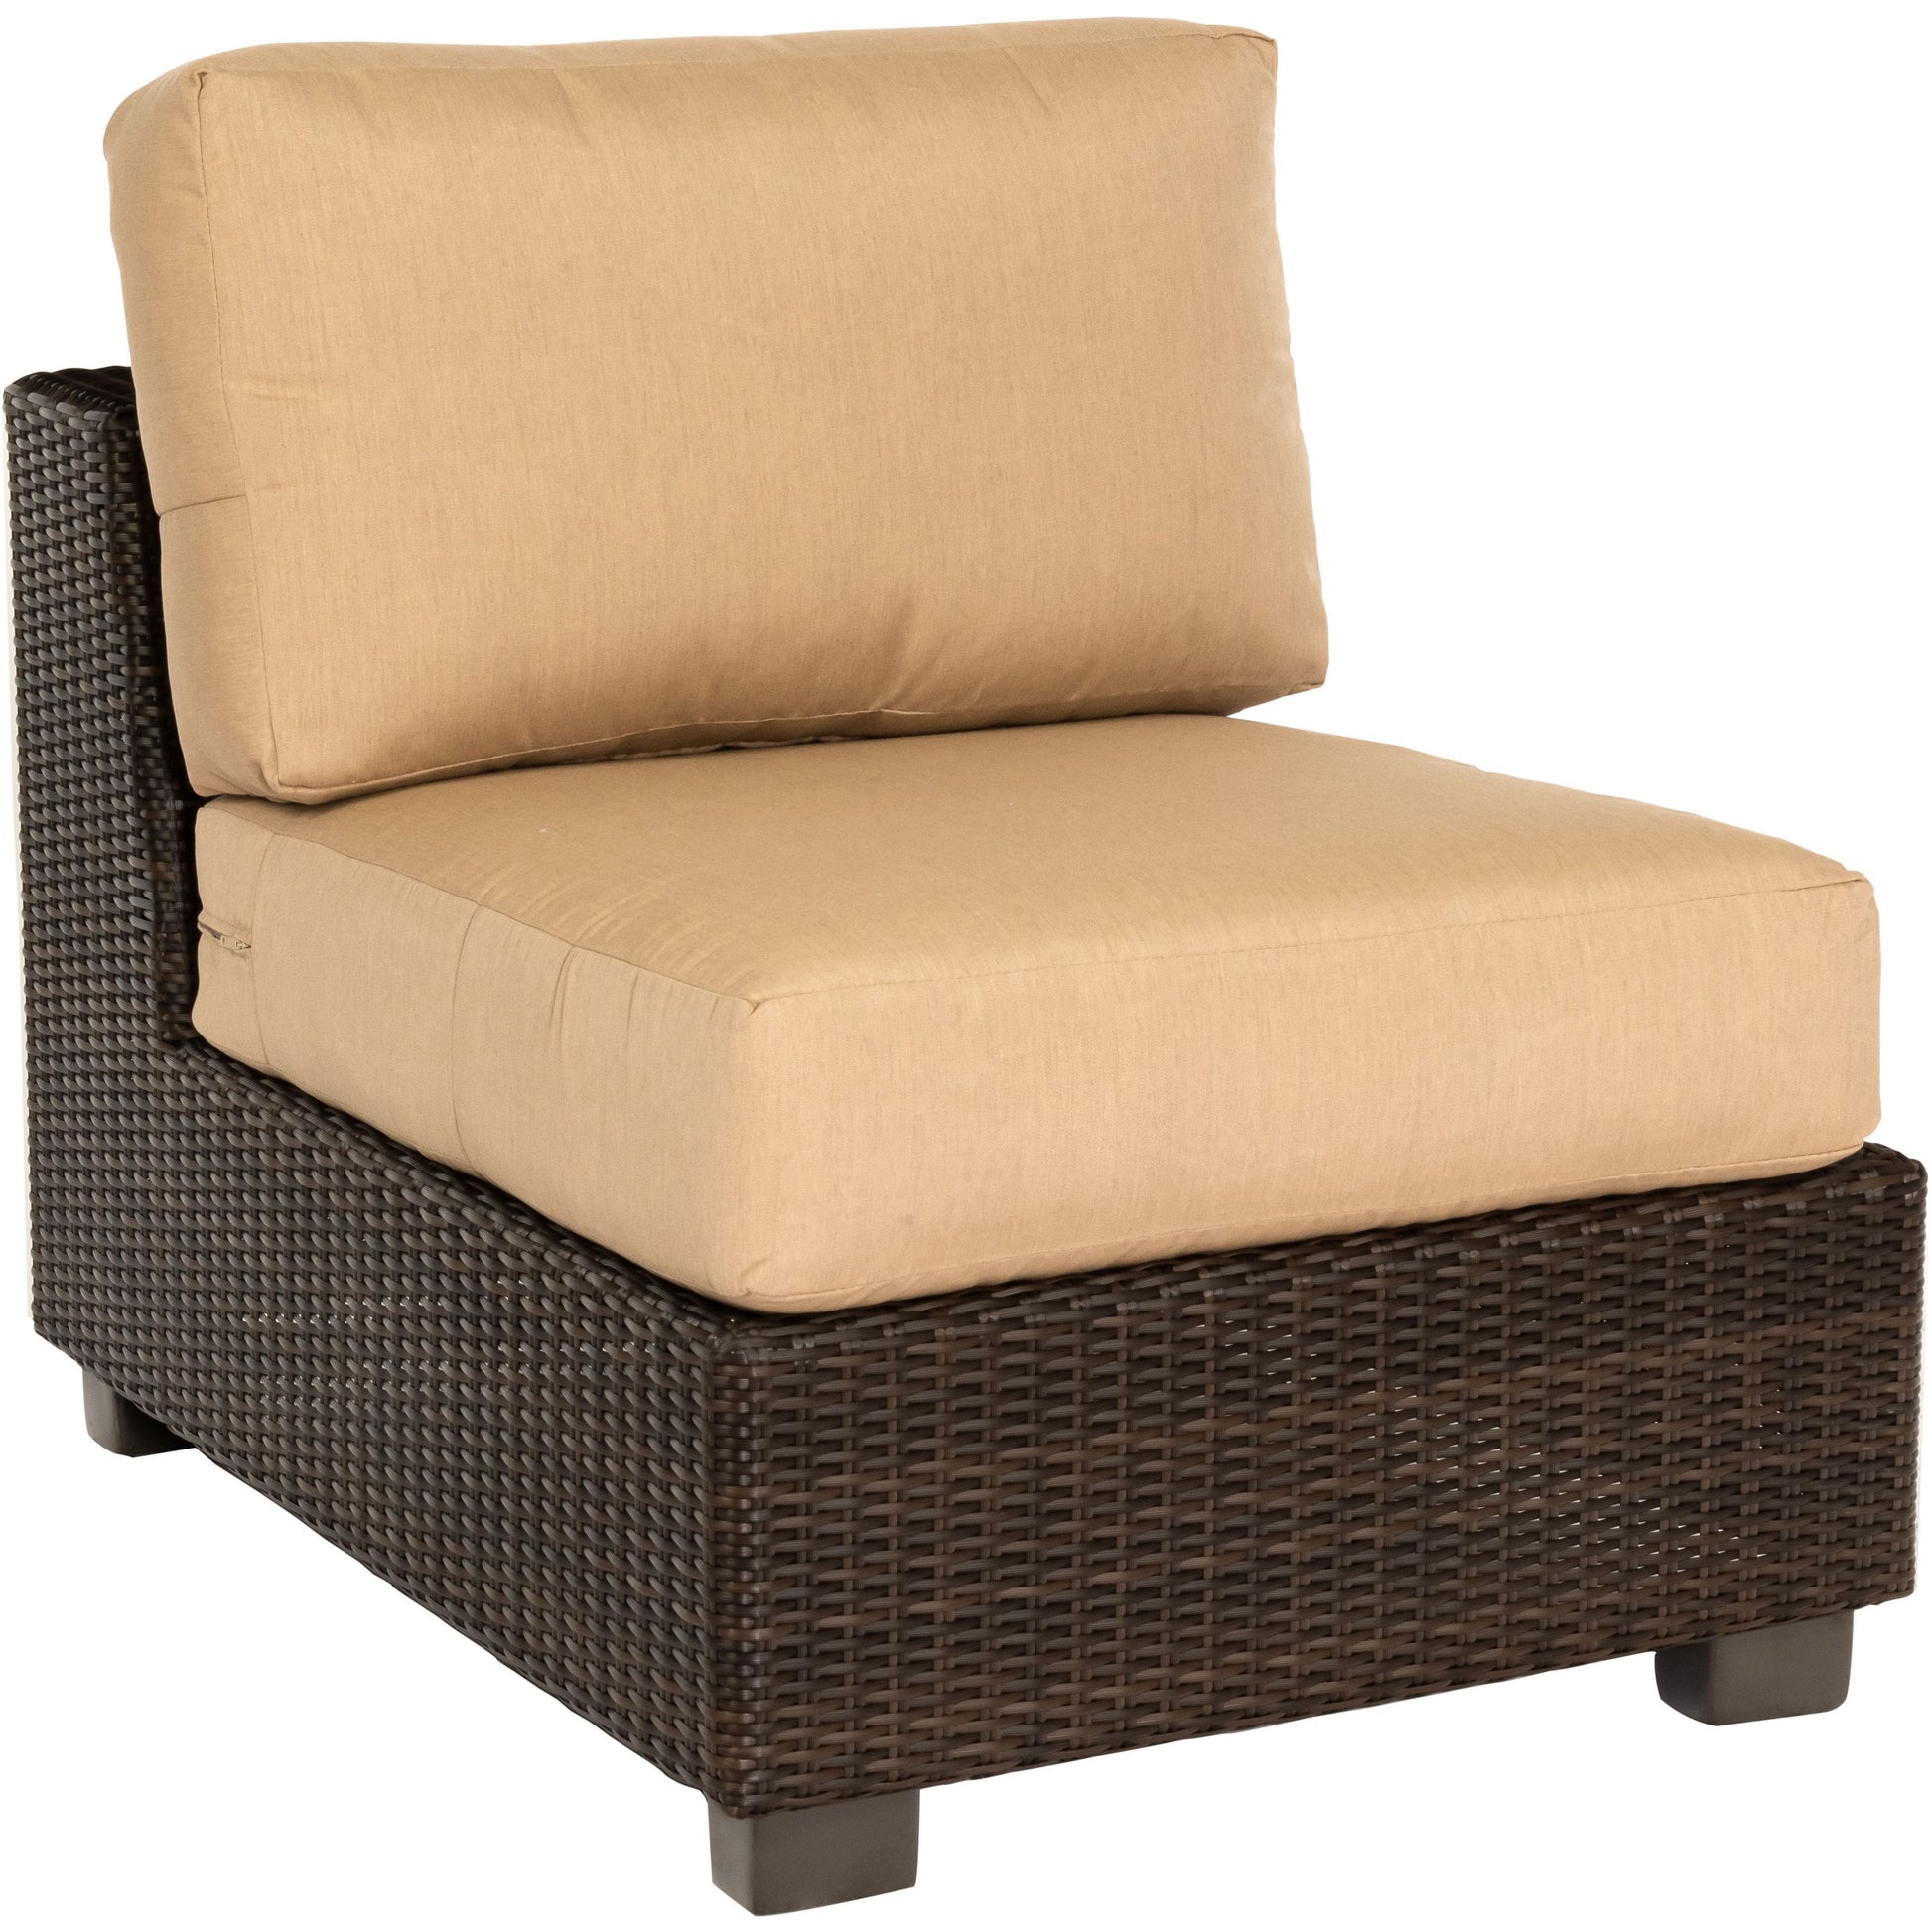 Armless Sectional Unit S511011 Woodard Outdoor Patio | Montecito Collection Seating Woodard 